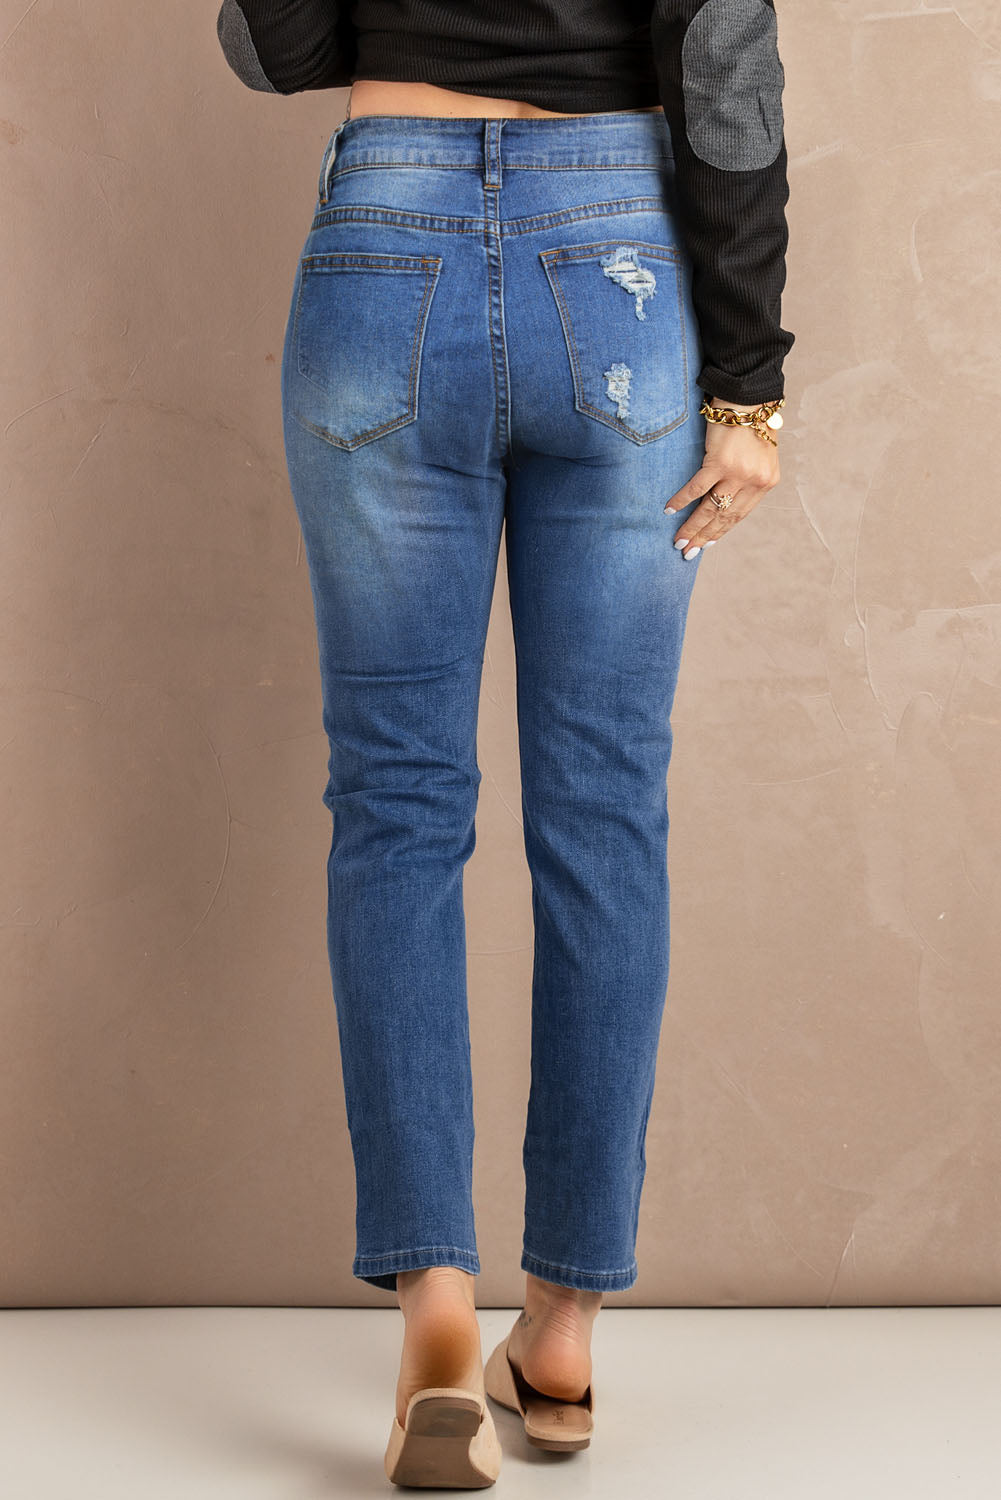 Wild West Hollow Out Skinny Ripped Jeans